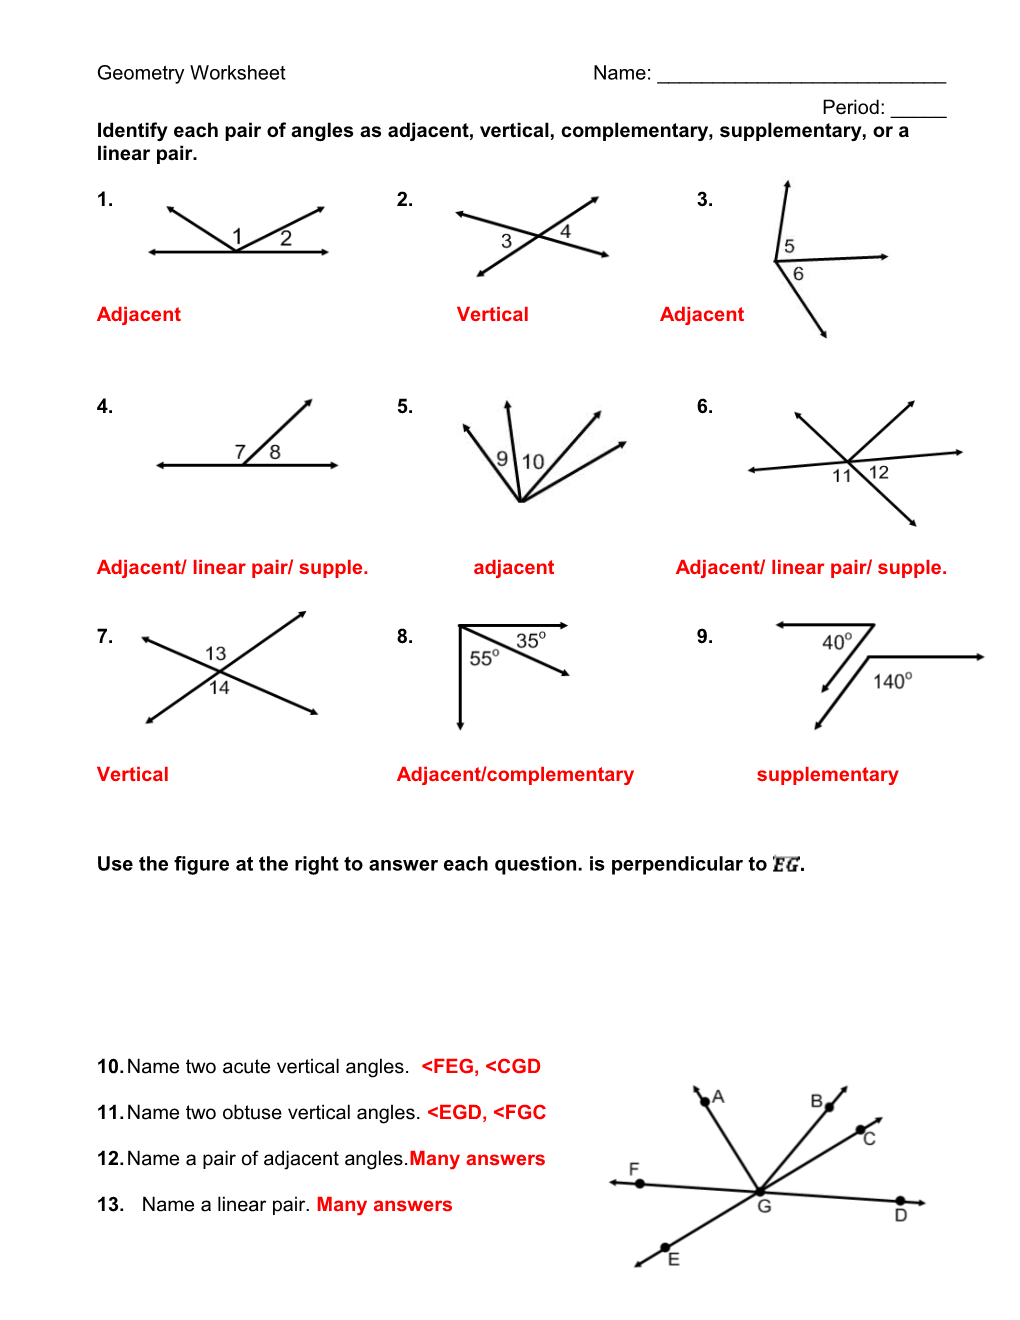 Identify Each Pair of Angles As Adjacent, Vertical, Complementary, Supplementary, Or A